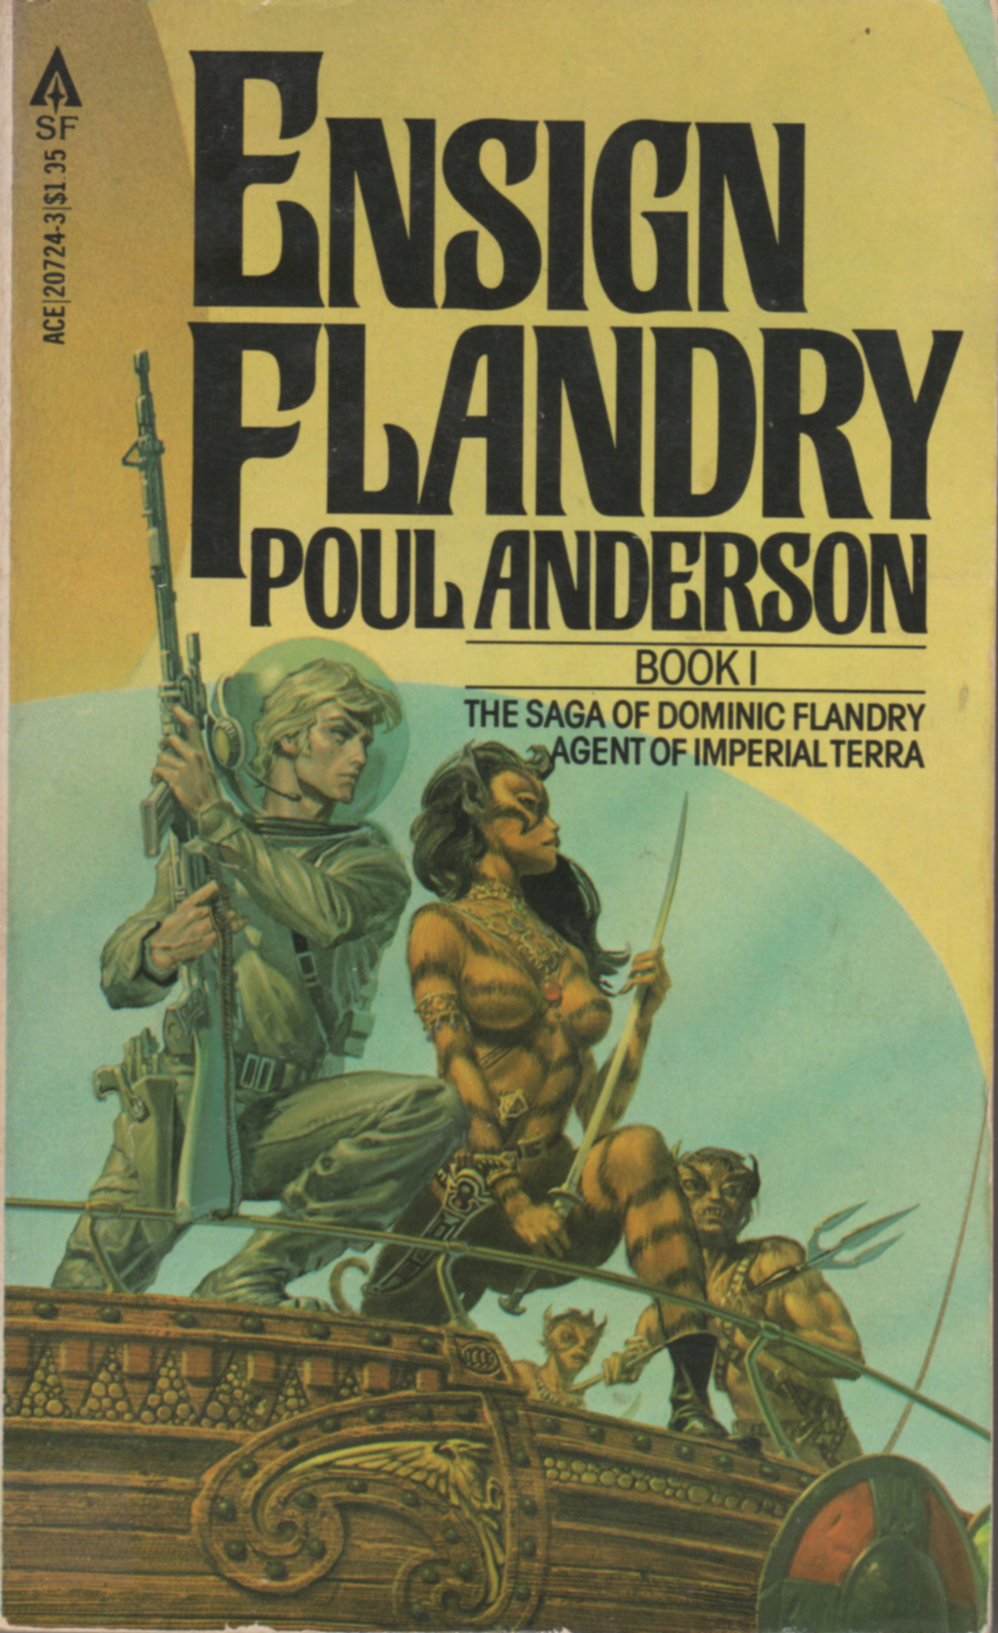 Image - cover of Ensign Flandry by Poul Anderson